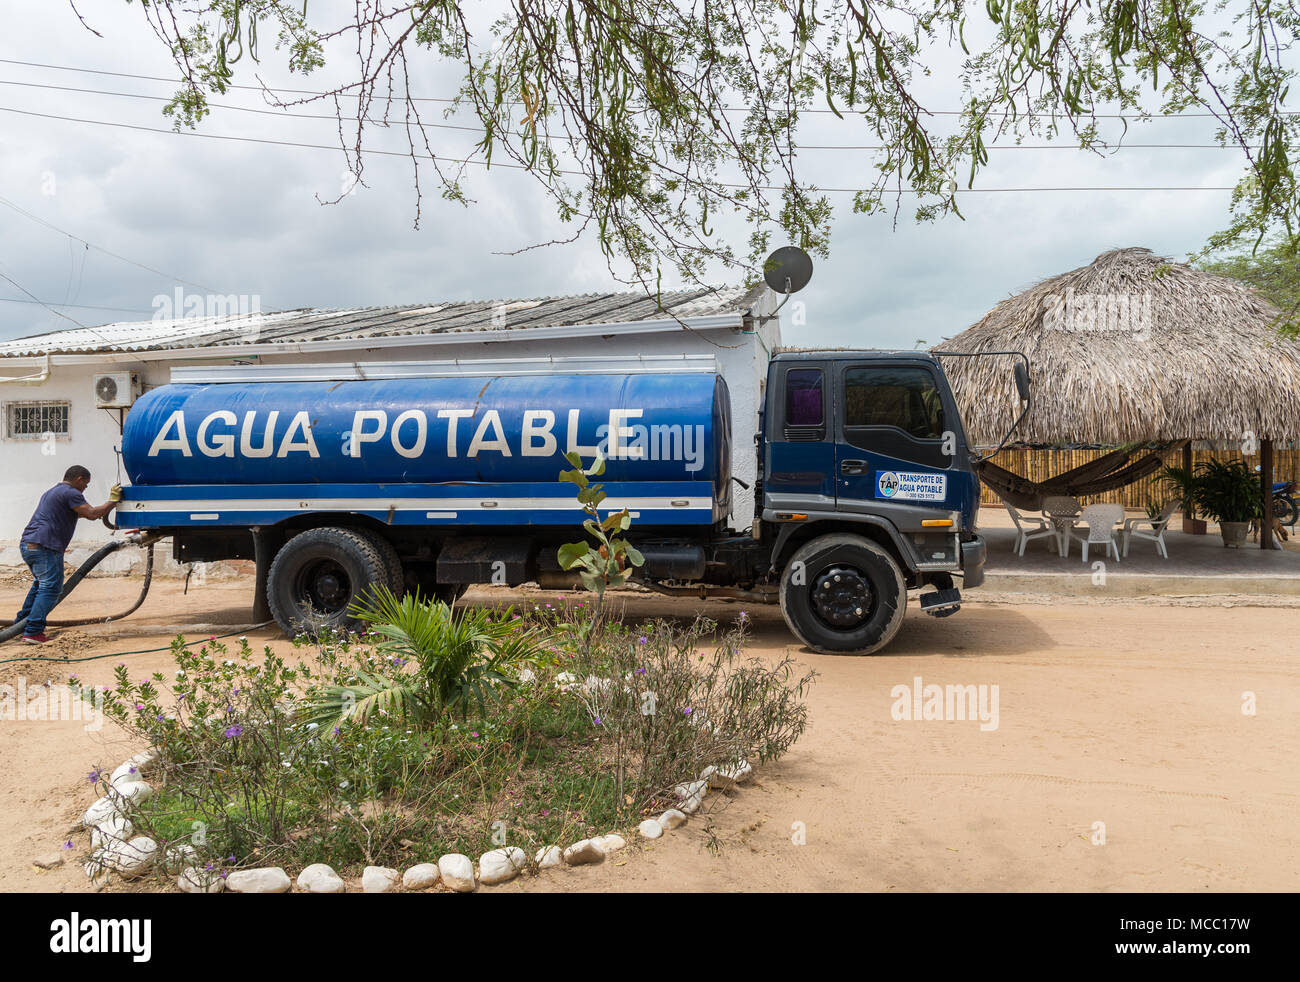 Truck delivers potable water to residents in rural area. Colombia, South America. Stock Photo